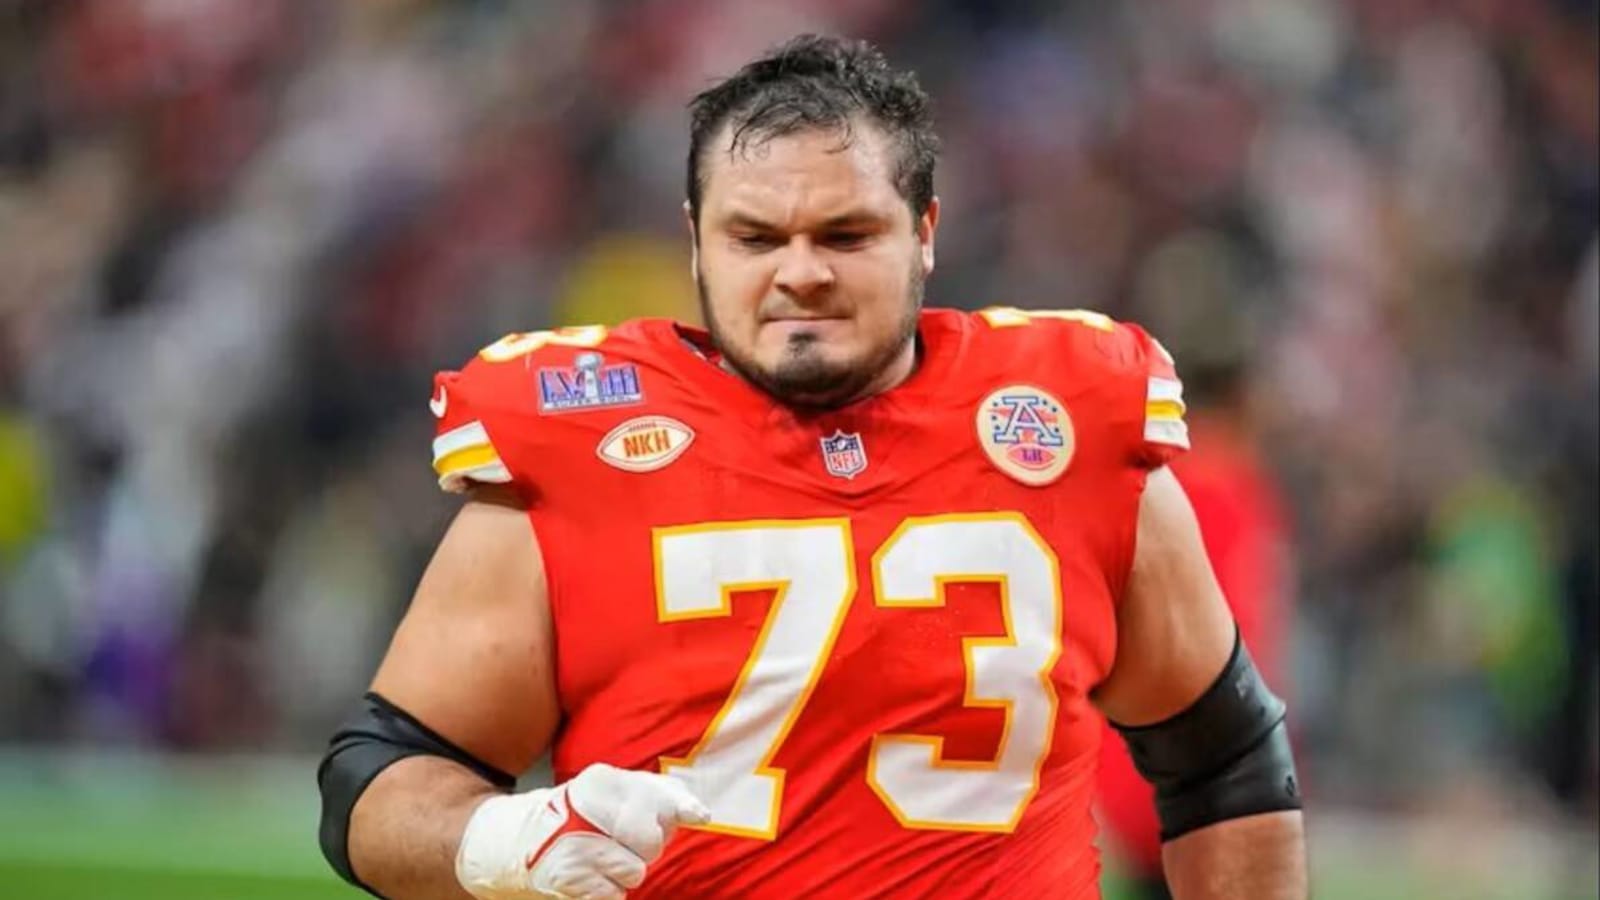 Chiefs Lineman Played Through Super Bowl With Torn UCL